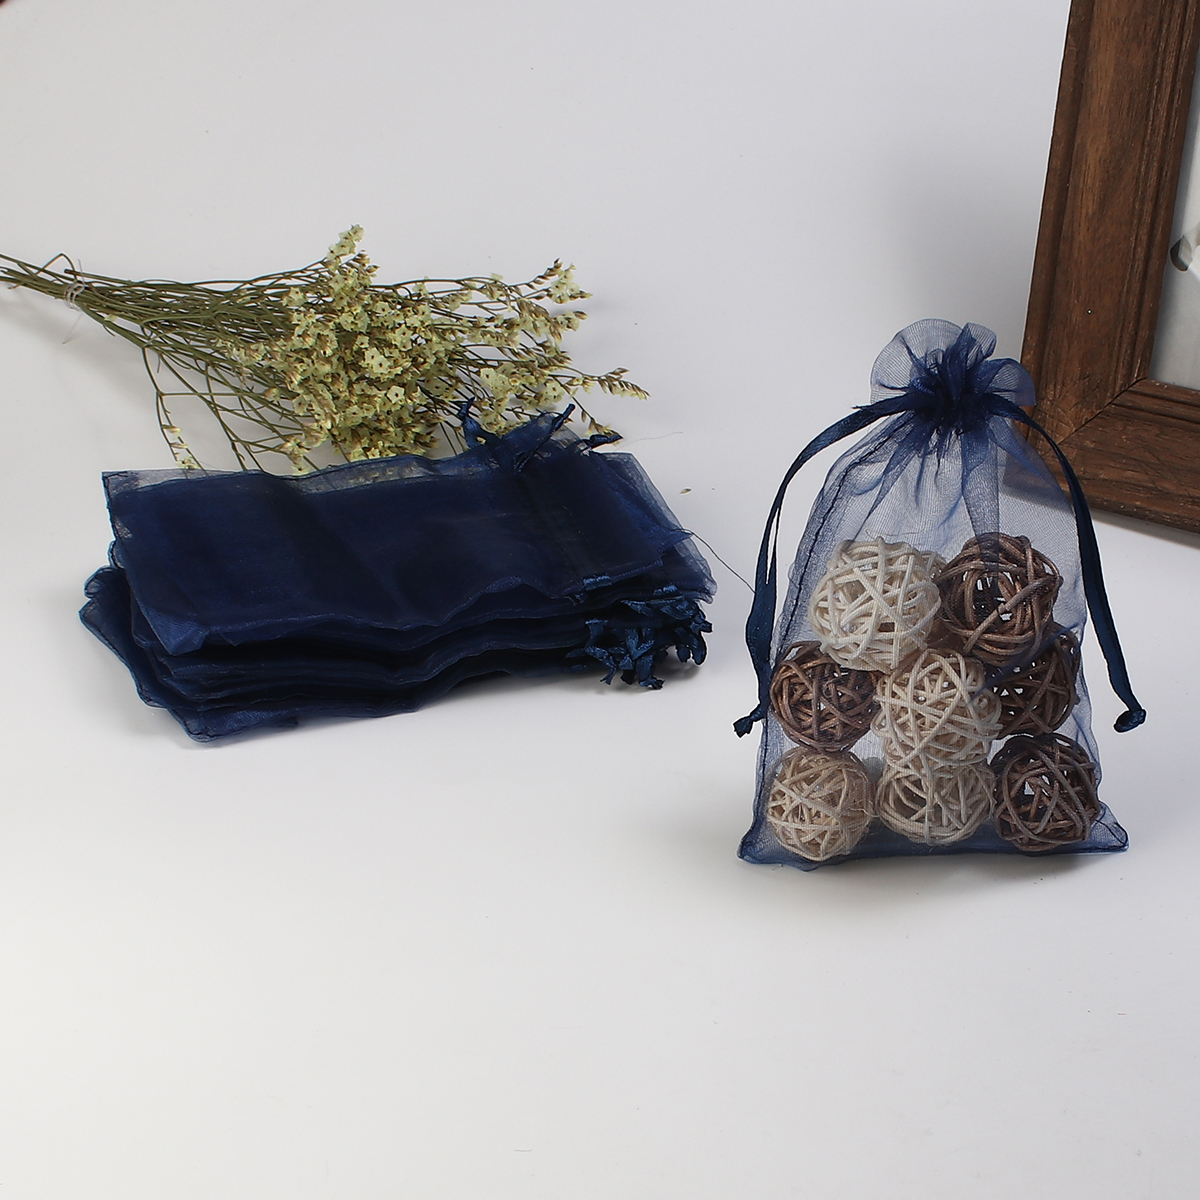 Picture of Wedding Gift Organza Jewelry Bags Drawstring Rectangle Navy Blue (Usable Space: 13x10cm) 15cm(5 7/8") x 10cm(3 7/8"), 20 PCs